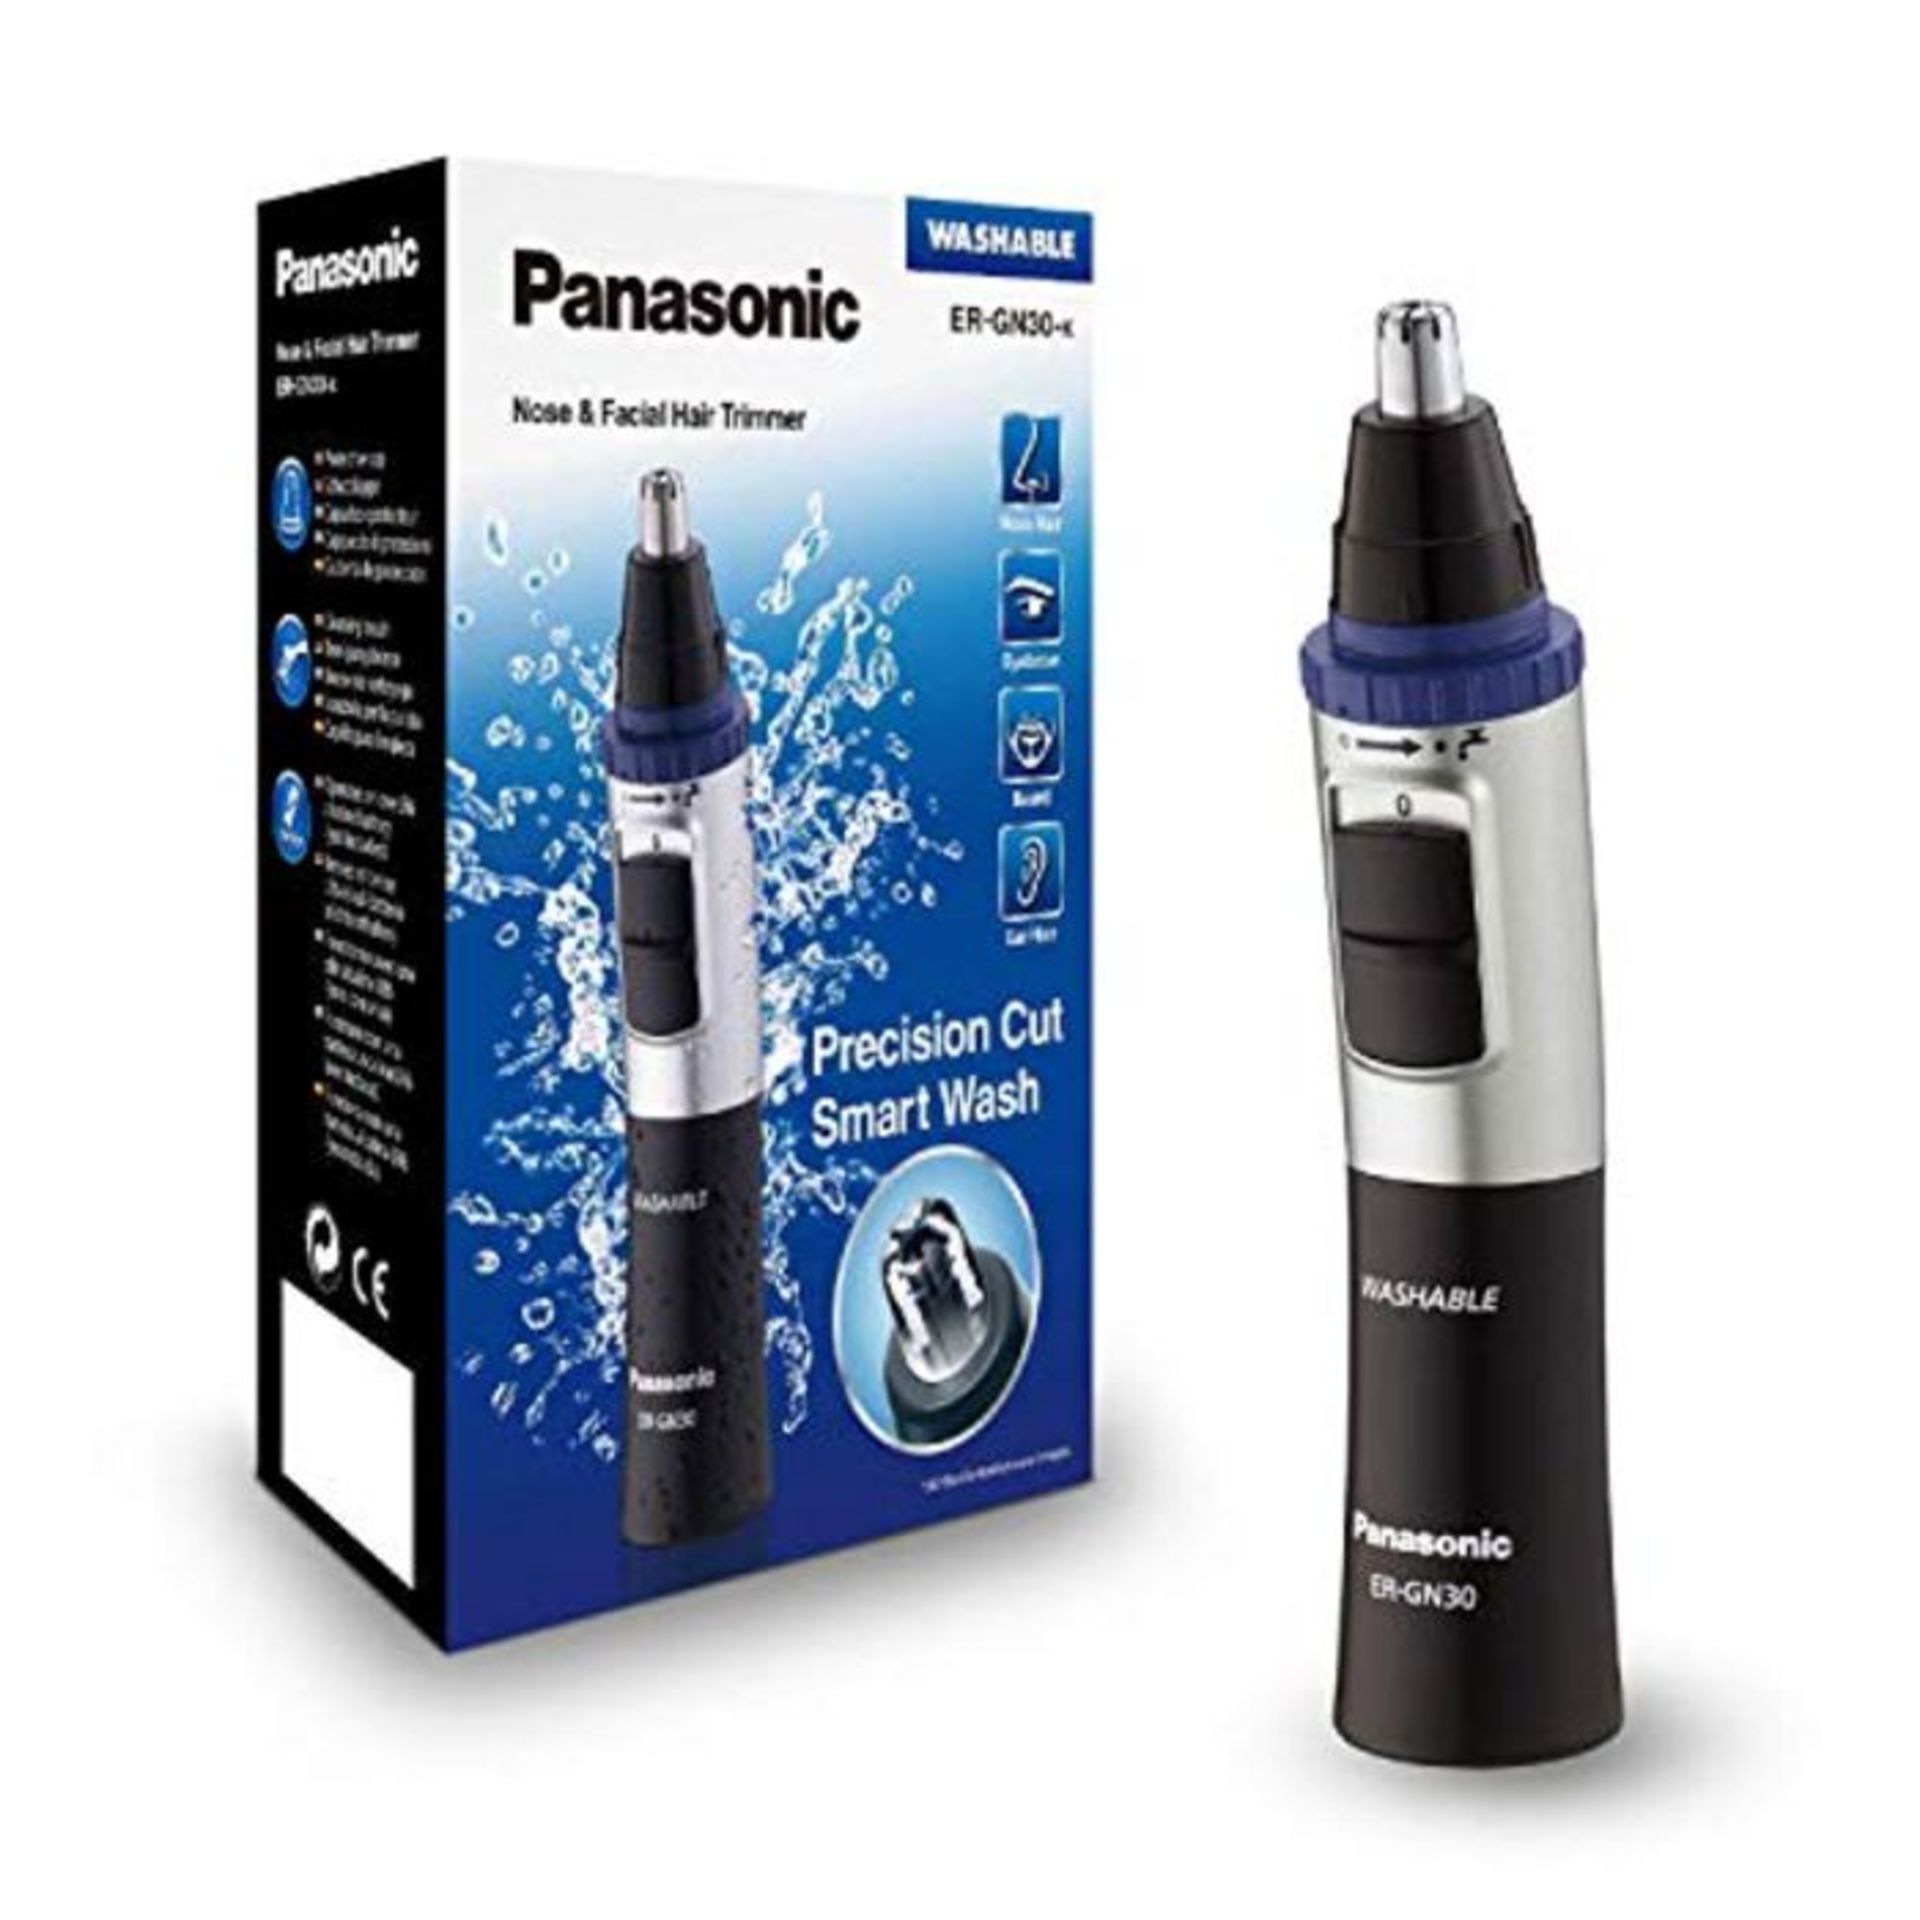 Panasonic ER-GN30 Wet and Dry Electric Nose, Ear and Facial Hair Trimmer for Men